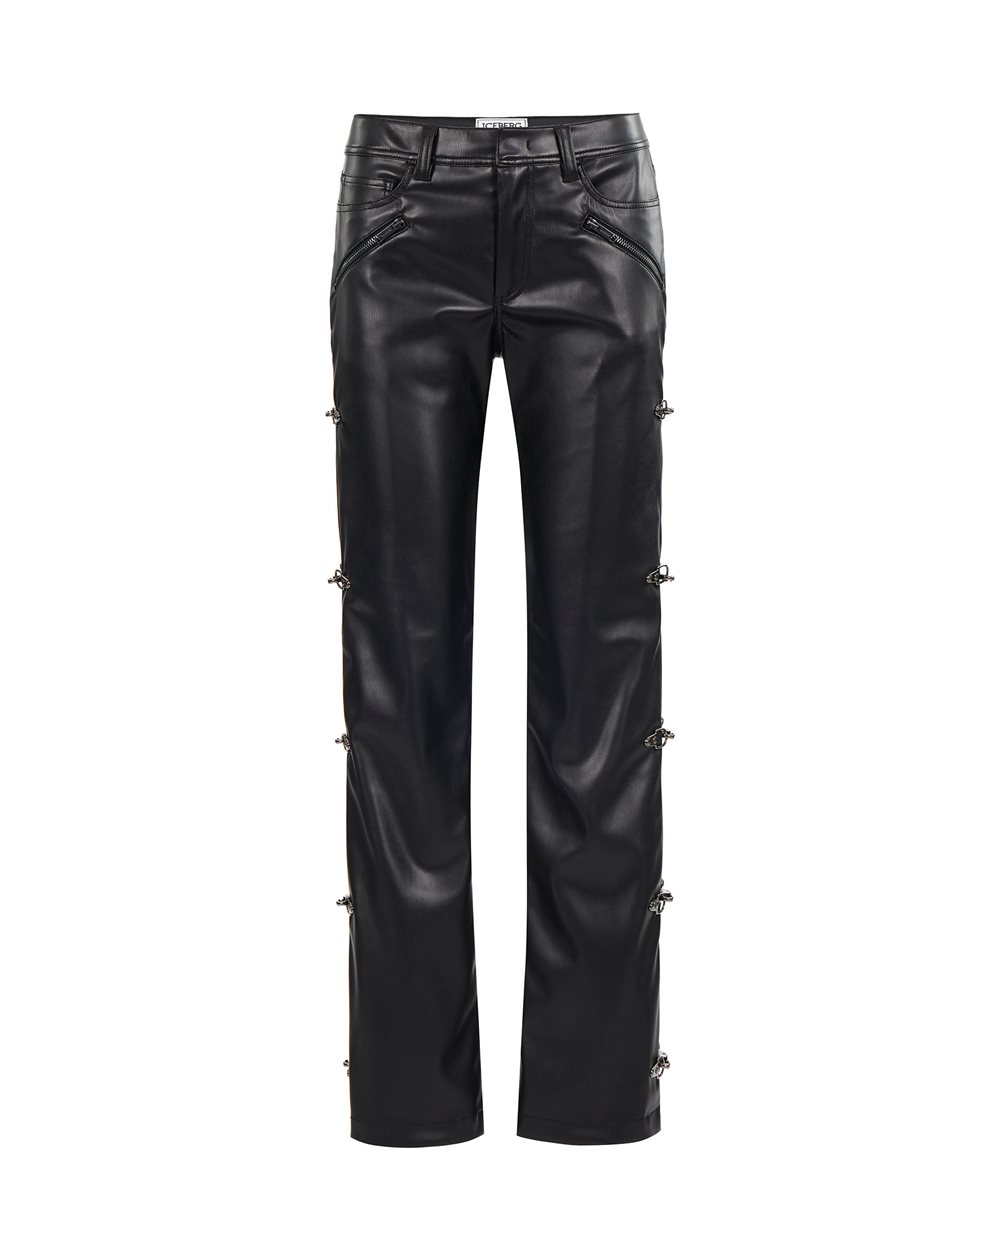 Eco-leather trousers with snap hooks - per abilitare | Iceberg - Official Website